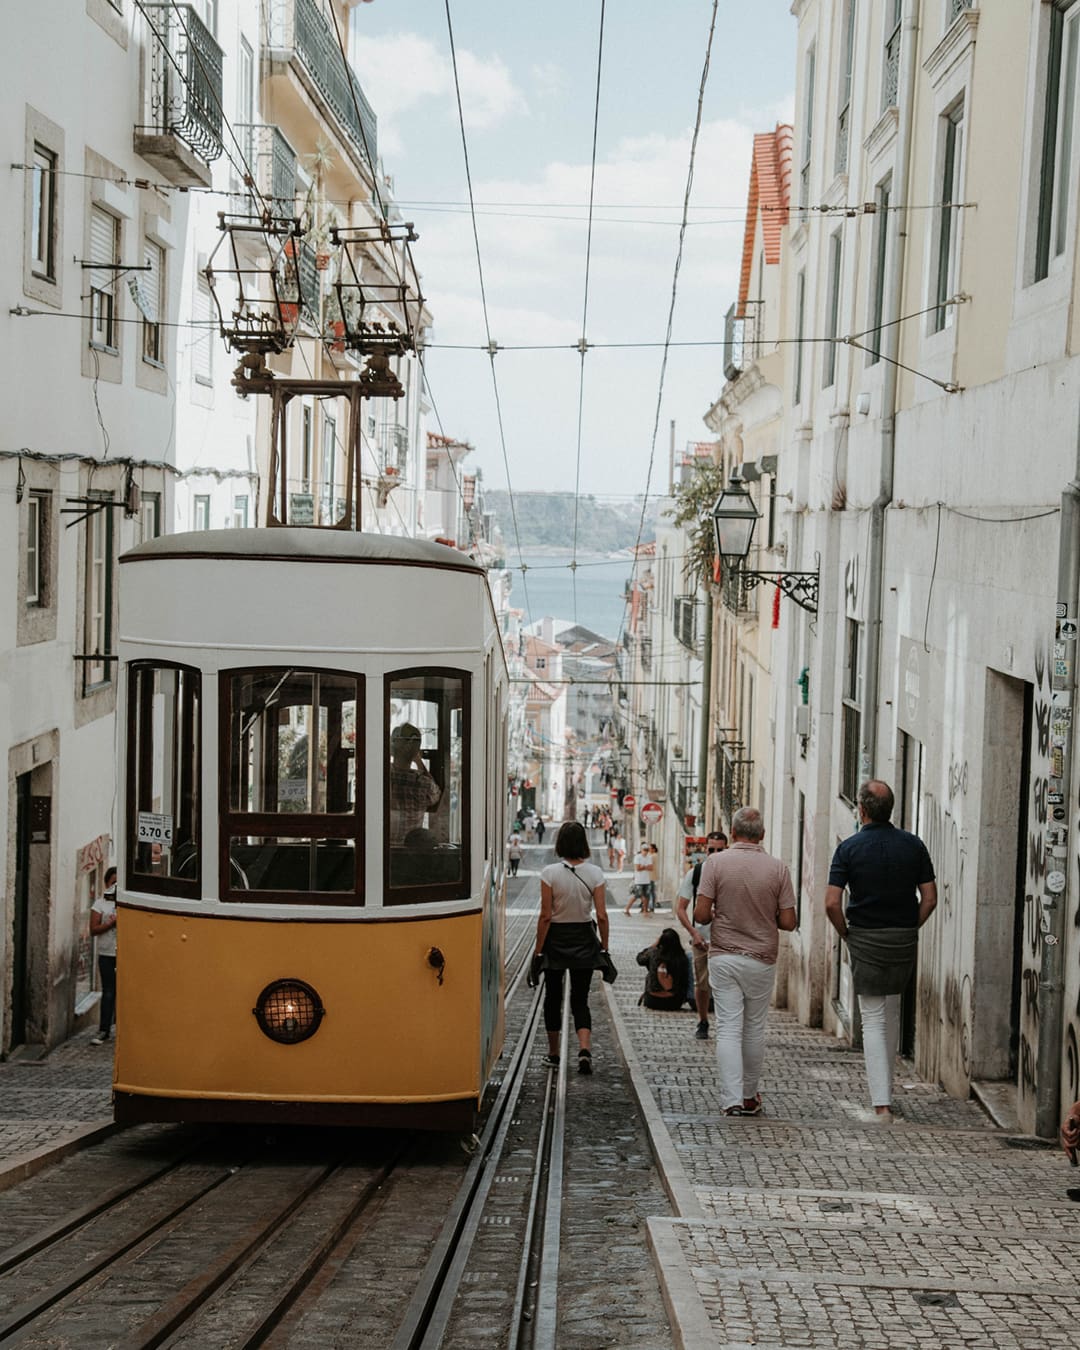 A yellow tram drives down a road in Lisbon